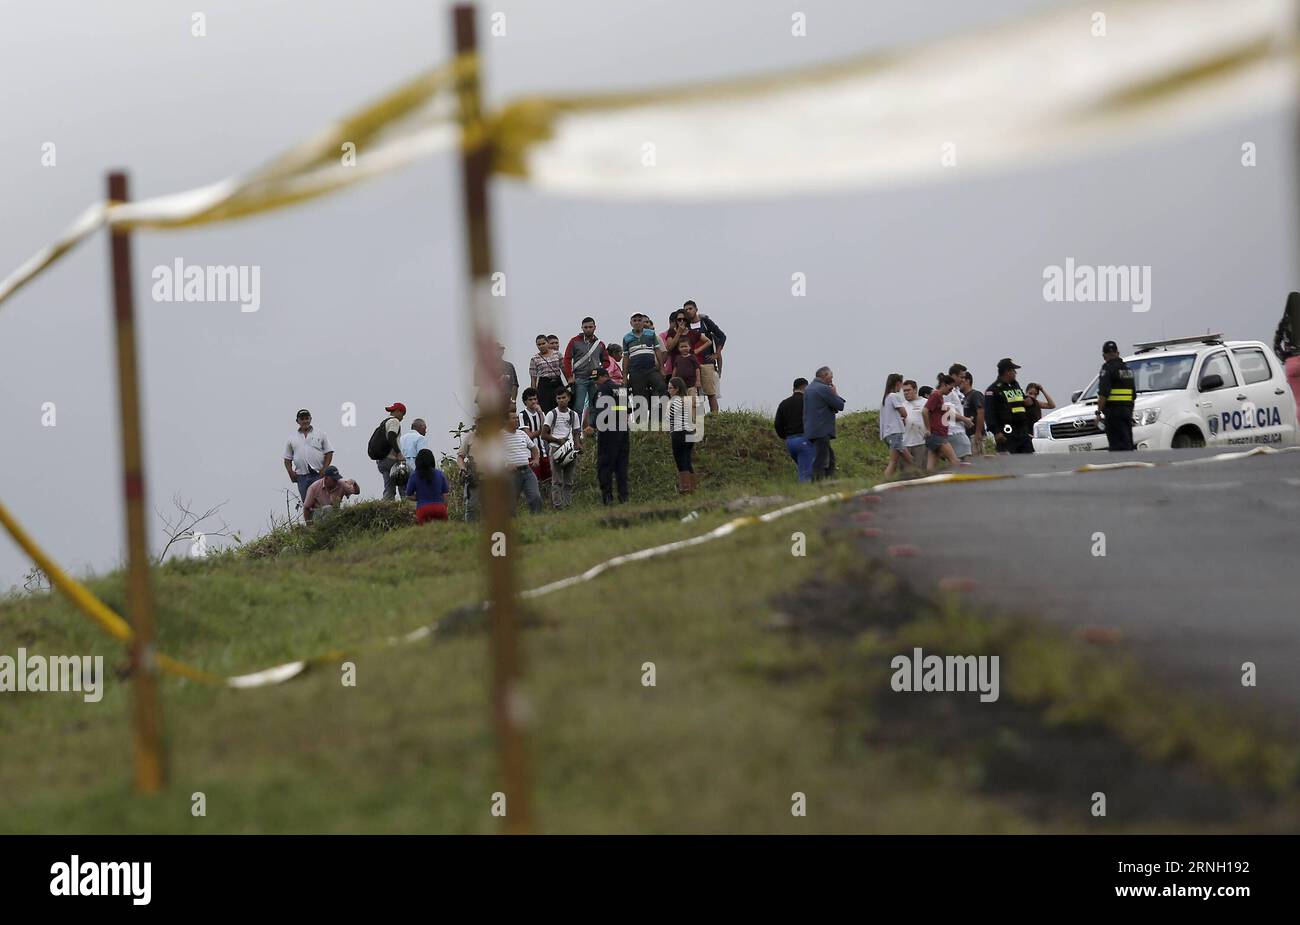 (161021) -- CINCHONA, Oct. 21, 2016 -- People gather at the site where a bus carrying 30 tourists fell off a 20-meter ditch, near the town of Cinchona, in the province of Alajuela, Costa Rica, on Oct. 20, 2016. At least 12 people were killed and 18 others injured in Costa Rica on Thursday when a bus carrying 30 tourists fell off a 20-meter ditch. Costa Rican President Luis Guillermo Solis declared three days of national mourning on Oct. 20-22, during which the national flag would be flown at half mast. Kent Gilbert) (fnc) (ce)(yy) COSTA RICA-CINCHONA-ACCIDENT-BUS e KENTxGILBERT PUBLICATIONxNOT Stock Photo